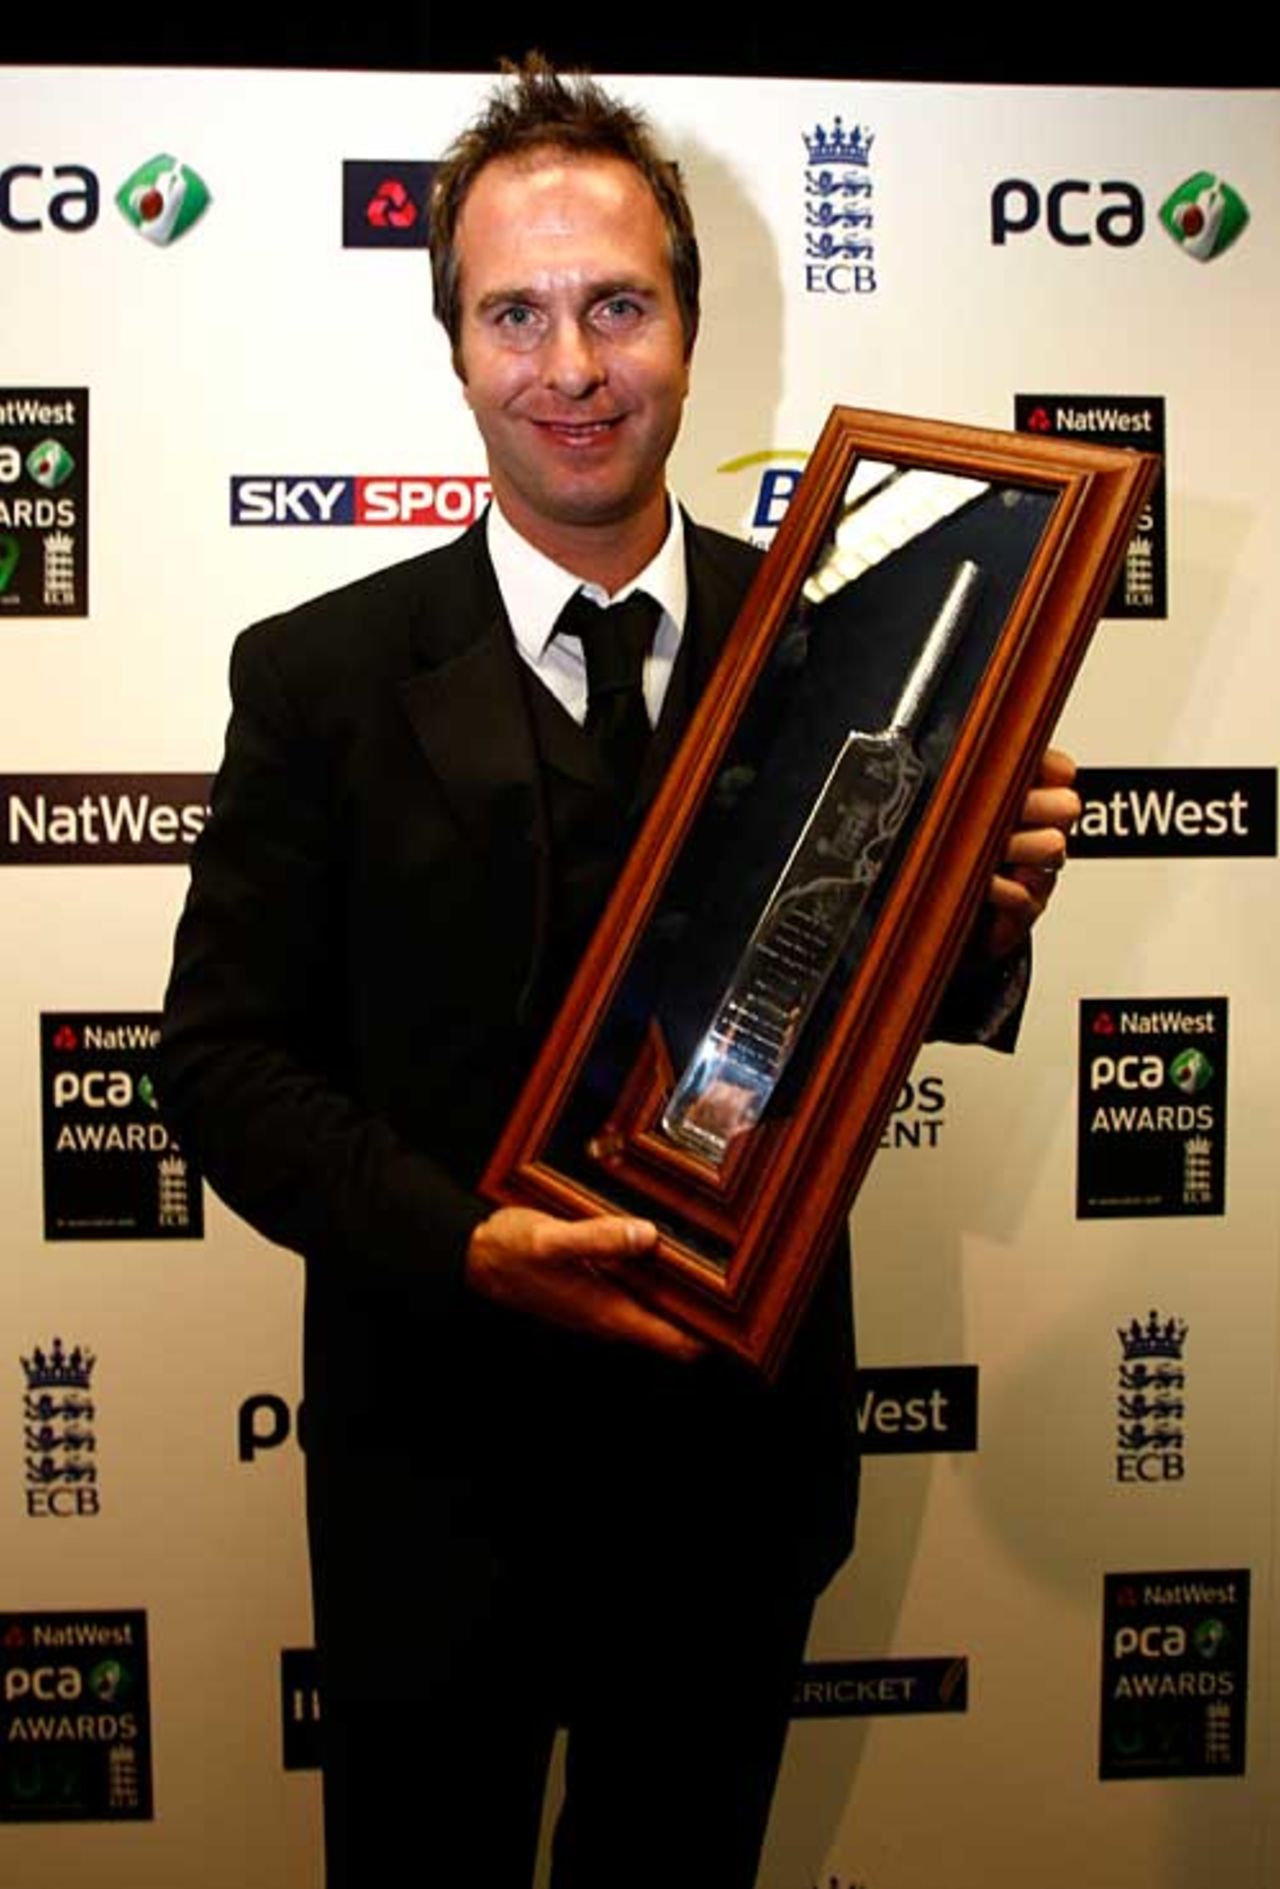 Michael Vaughan was given an ECB special award at the PCA dinner, Old Billingsgate, London, October 8, 2009